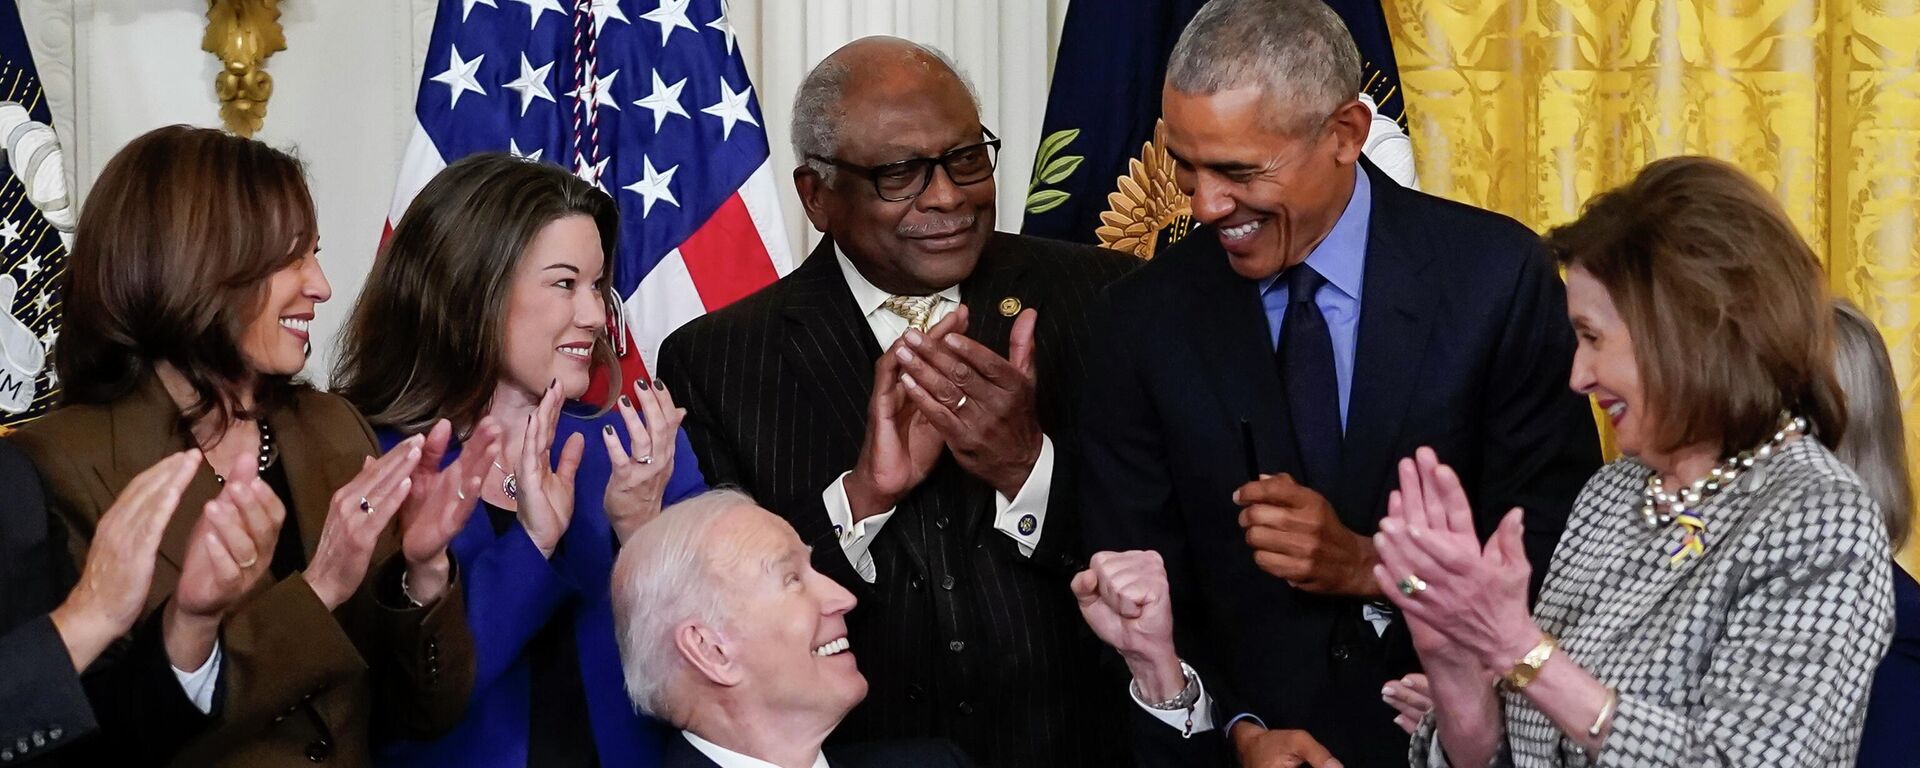 President Joe Biden looks to former President Barack Obama after signing an executive order during and event about the Affordable Care Act, in the East Room of the White House in Washington, April 5, 2022. - Sputnik International, 1920, 26.06.2022